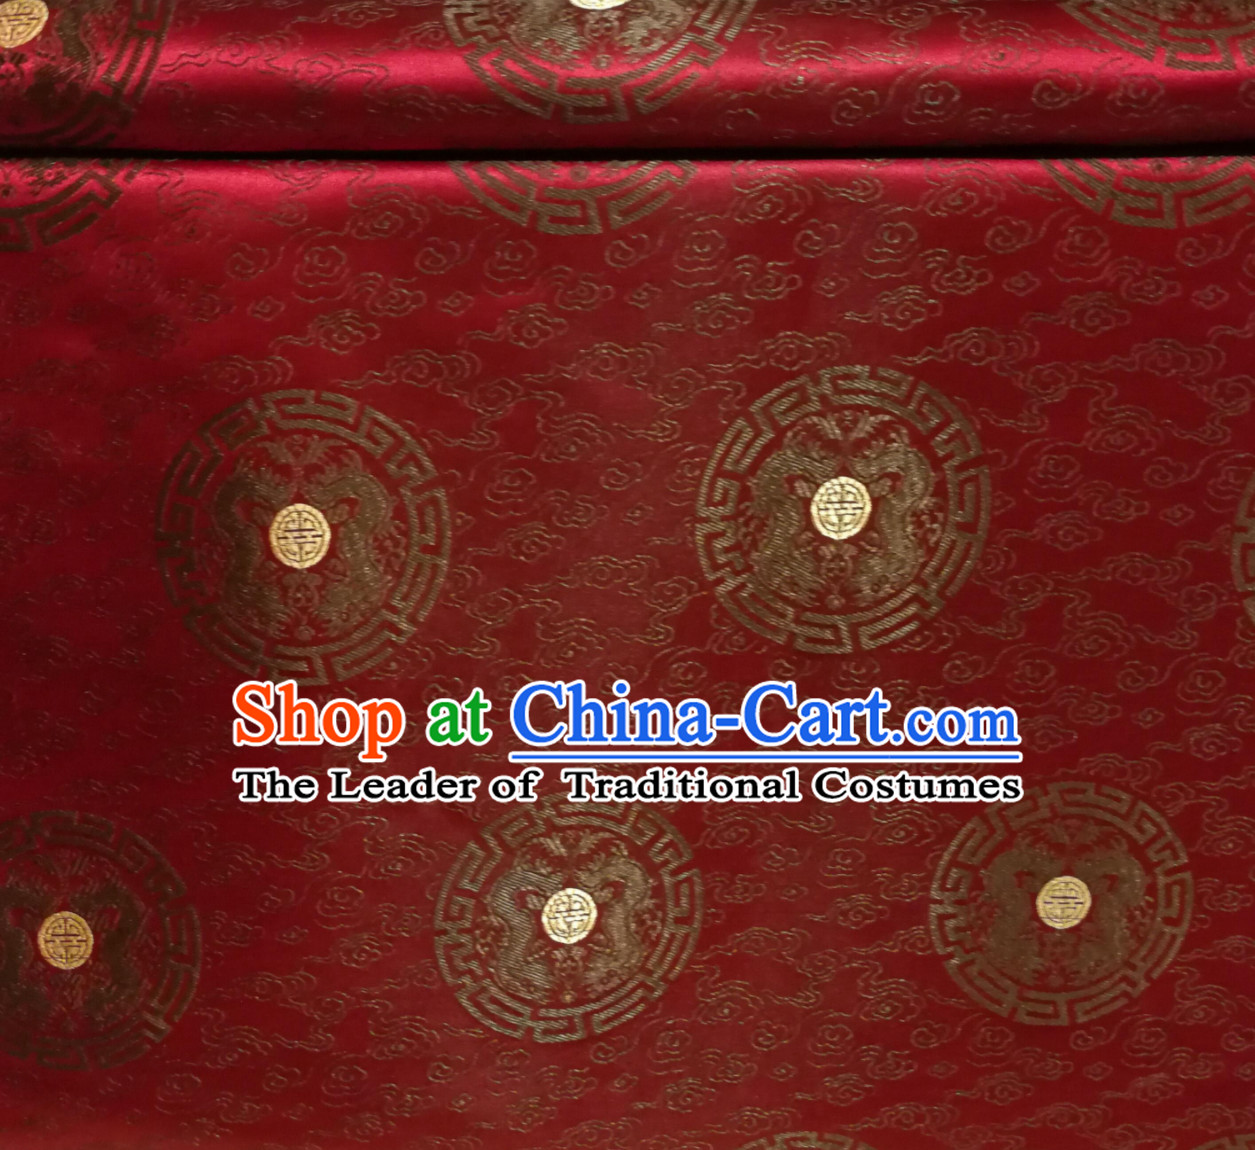 Dark Red Color Chinese Royal Palace Style Traditional Round Dragon Pattern Design Brocade Fabric Silk Fabric Chinese Fabric Asian Material